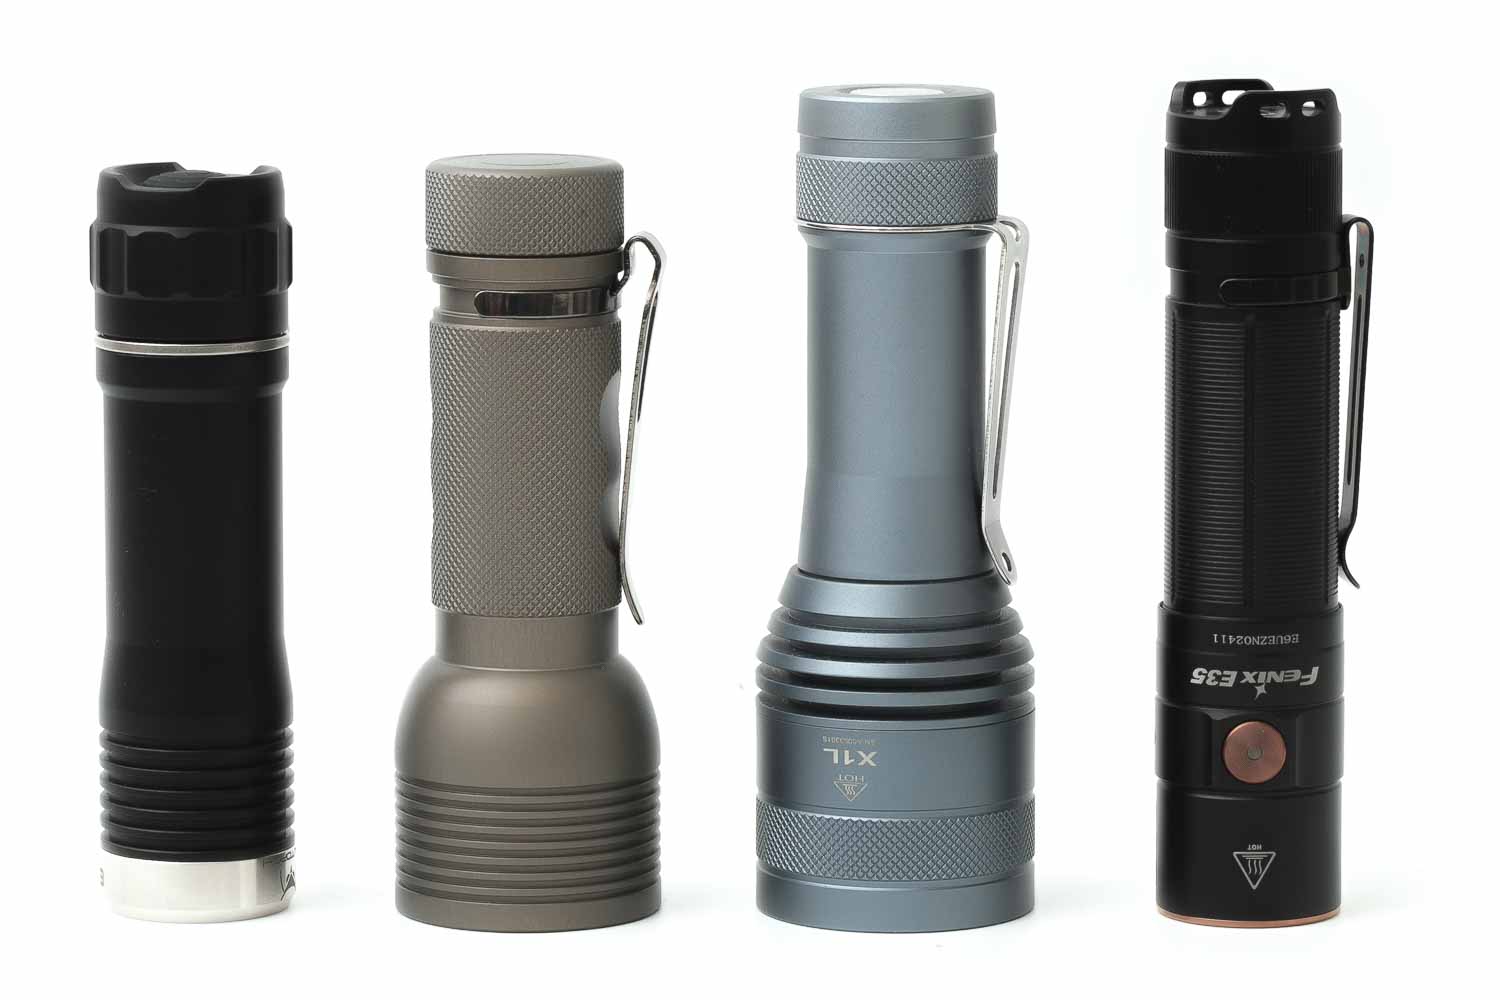 Amutorch E3H comparison with 3 other edc flashlights